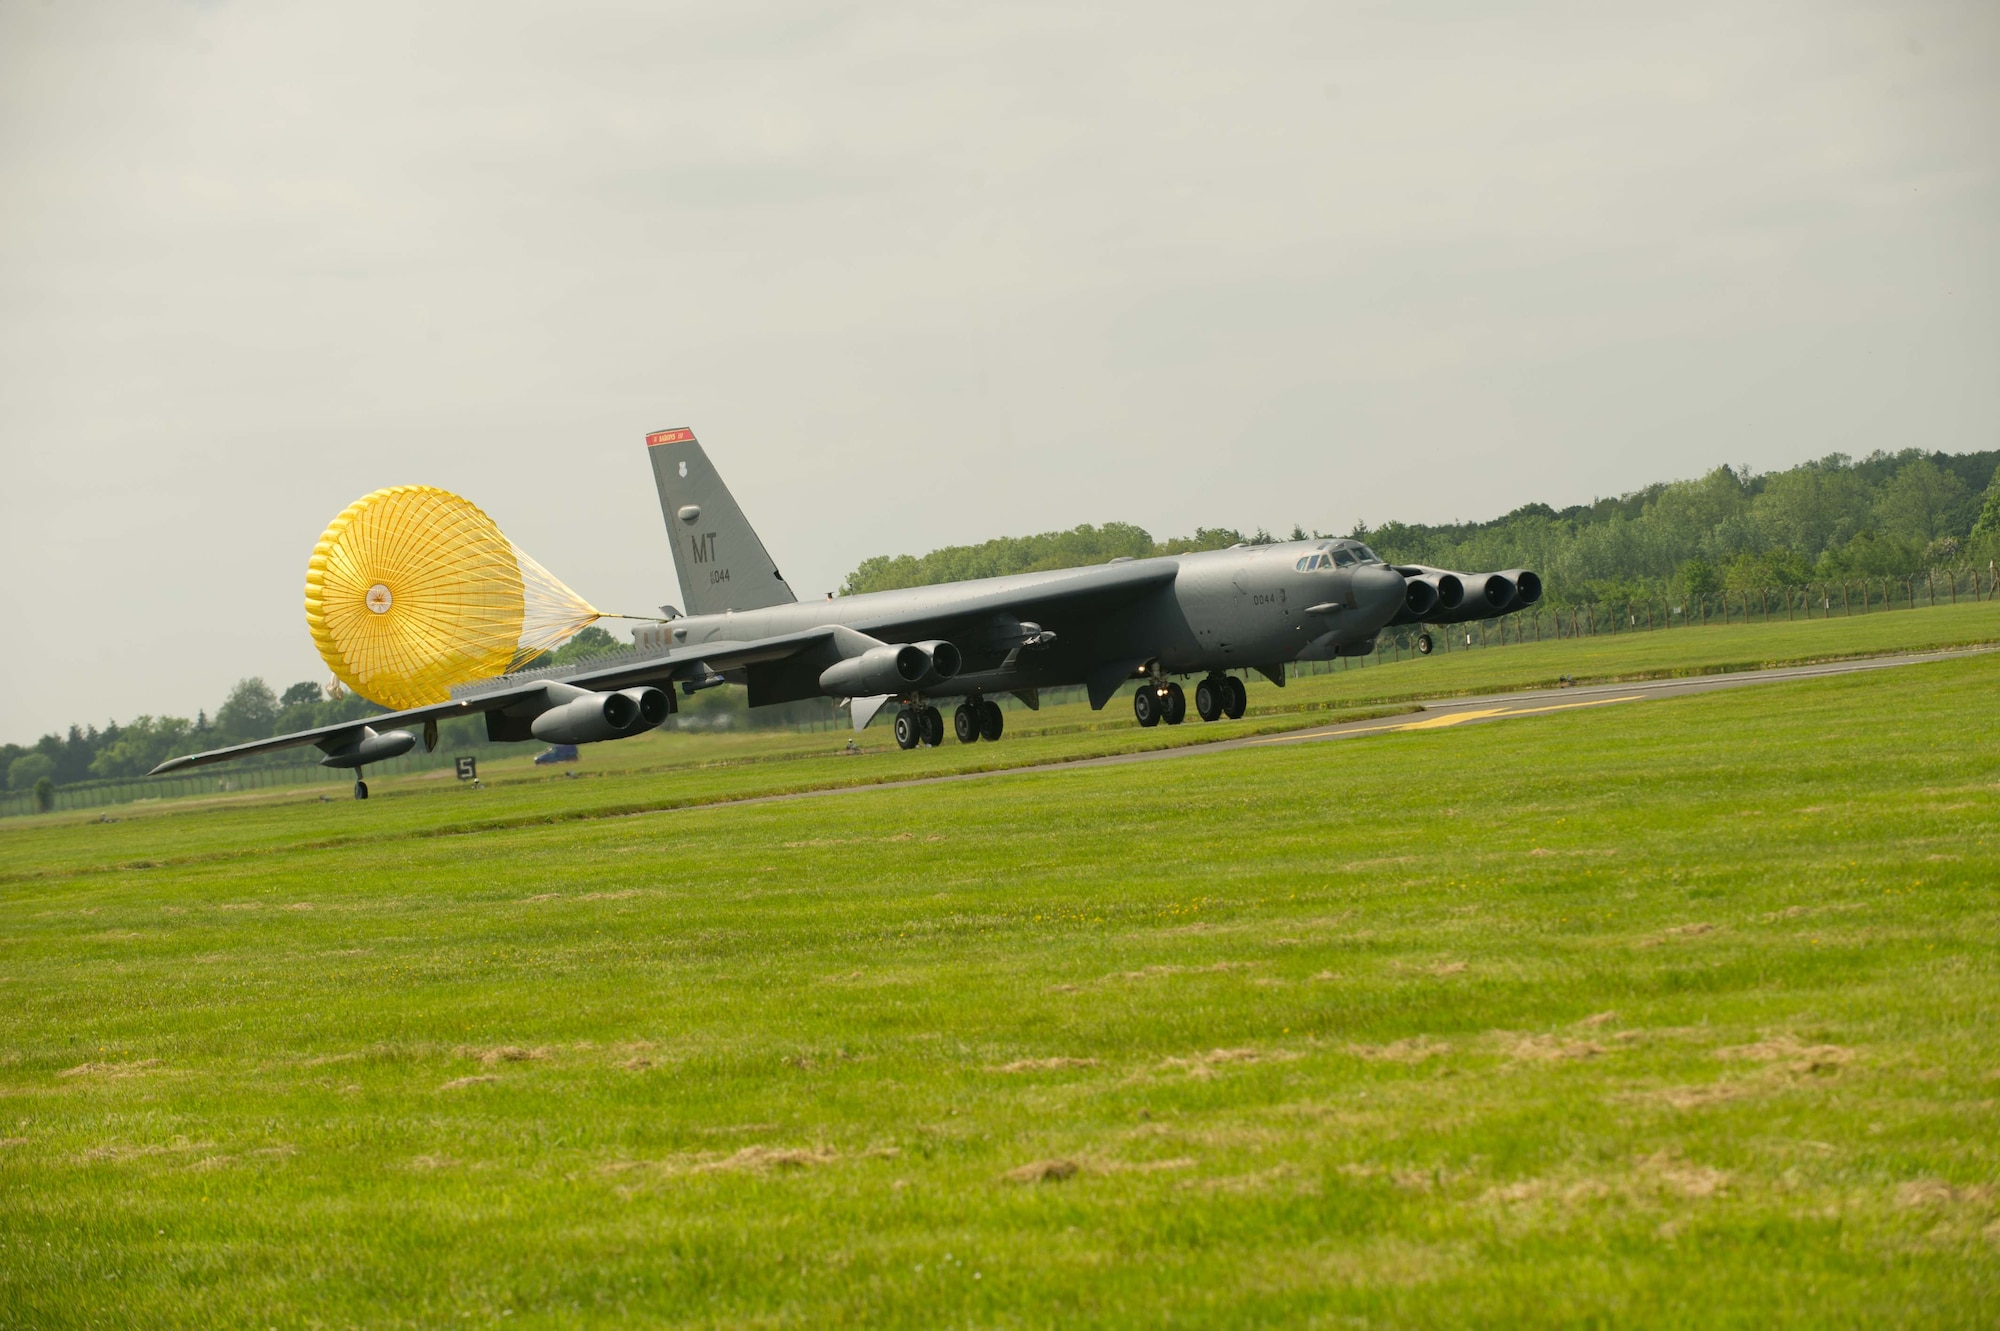 A B-52H Stratofortress from Minot Air Force Base, N.D., lands on the runway at Royal Air Force Fairford, United Kingdom, June 2, 2016. During the short term deployment, three strategic bombers are scheduled to conduct training flights with ground and naval forces around the region and participate in multinational exercises BALTOPS 16 and Saber Strike 16, and U.S. Africa Command’s Just Hammer. The bombers will integrate into several exercise activities, including air intercept training, mining operations, inert ordnance drops and close-air support. (U.S. Air Force photo/Senior Airman Sahara L. Fales)